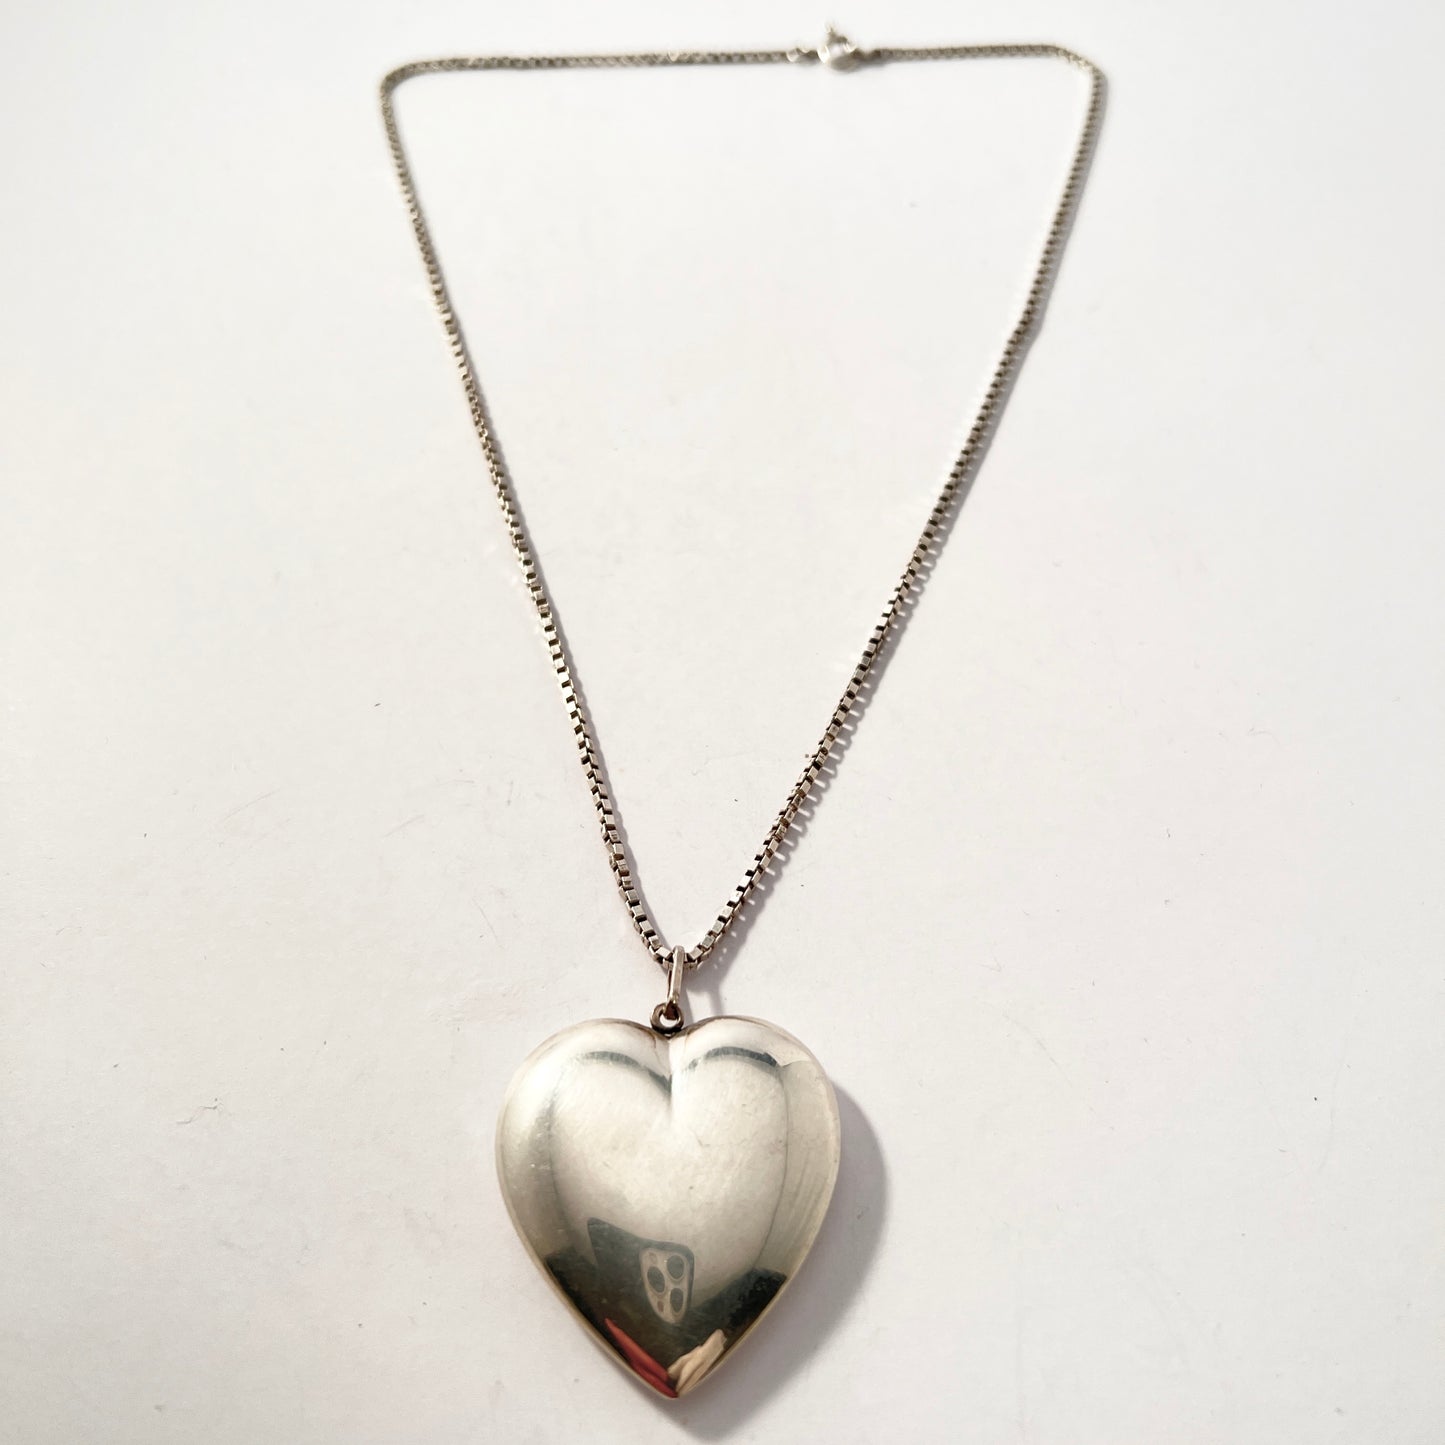 Italy, Vintage Sterling Silver Heart Love Pendant Necklace.